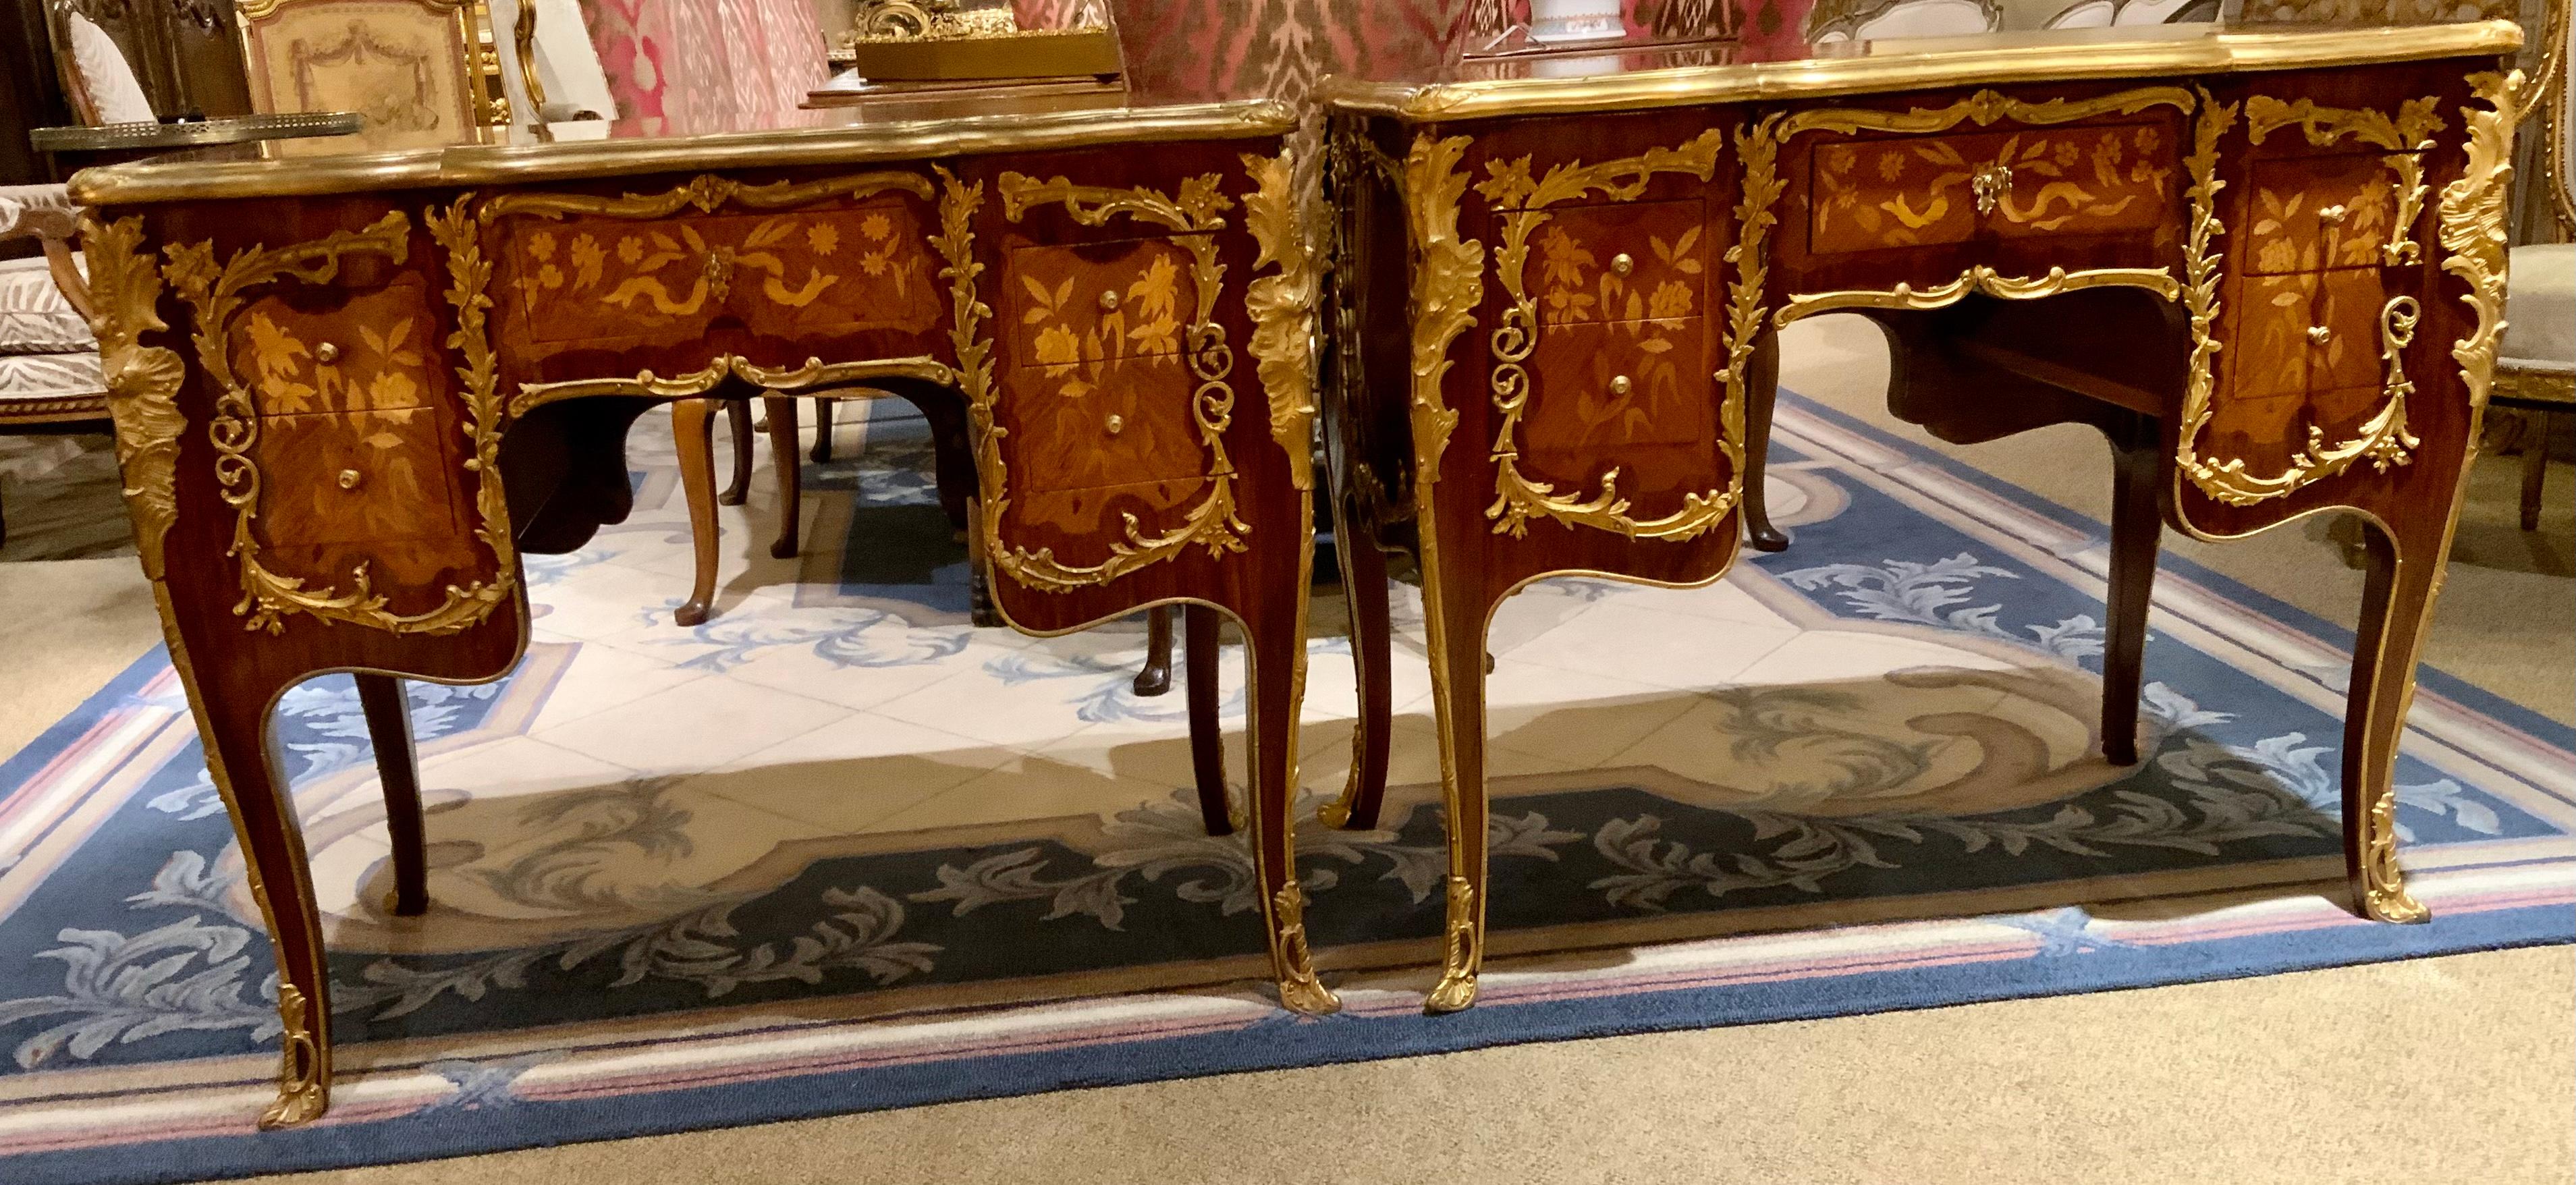 The expert cabinetry makes this pair special. The marquetry inlay is
Superb in quality. The bronze dore mounts are well cast and the brilliant 
Hue of the gold is excellent. The legs are gently curved in the Louis XV
Style. Foliate and floral